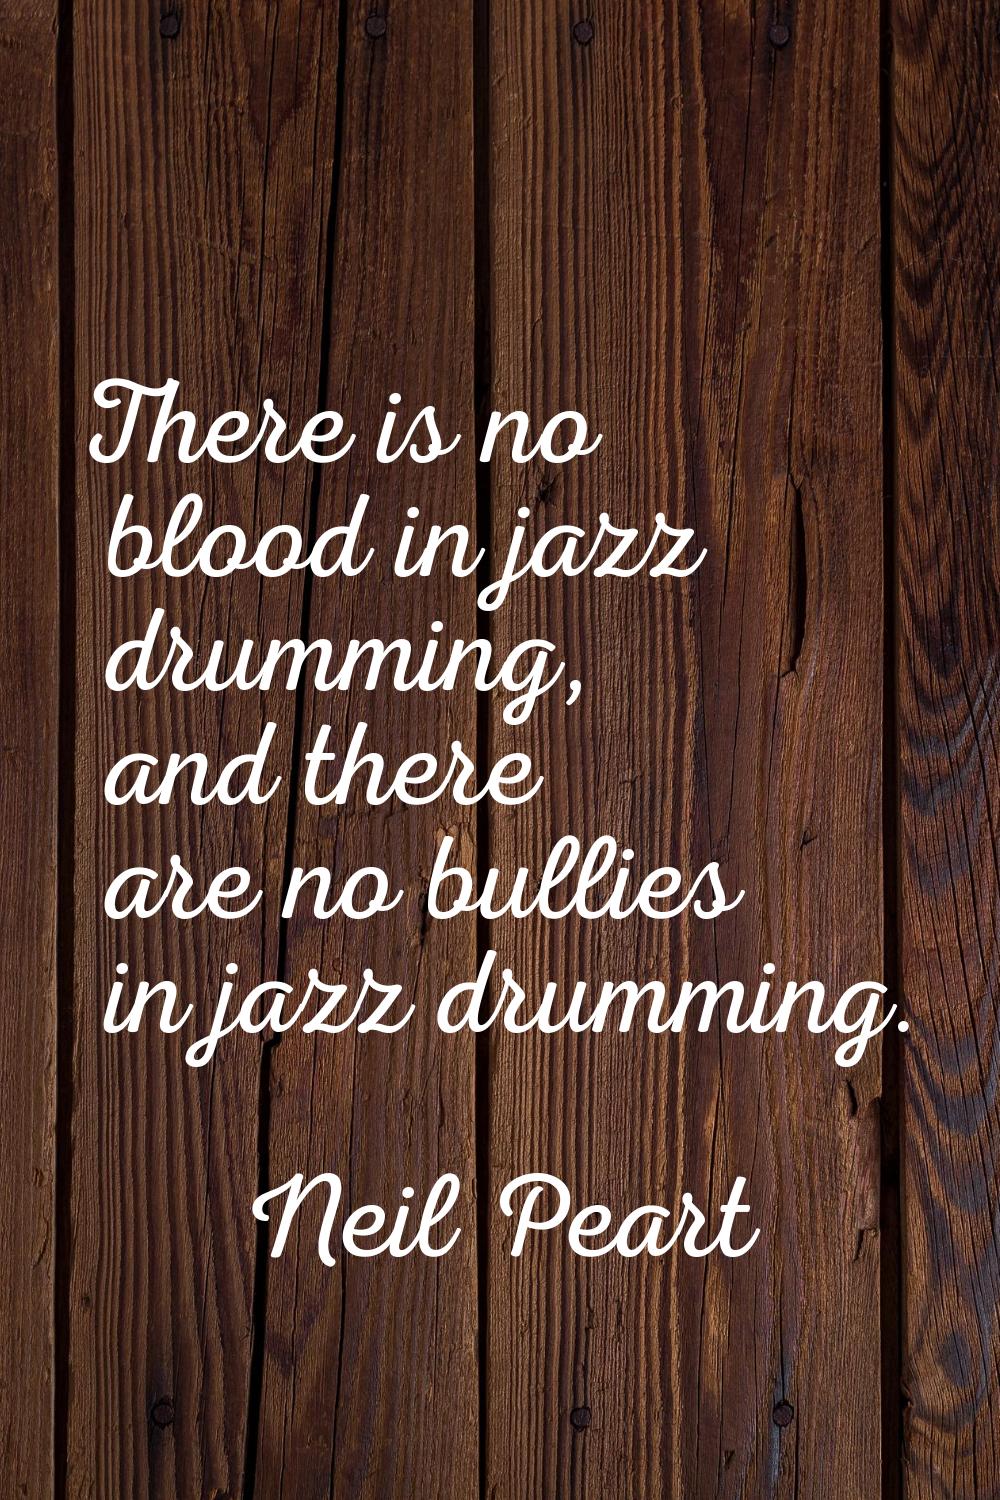 There is no blood in jazz drumming, and there are no bullies in jazz drumming.